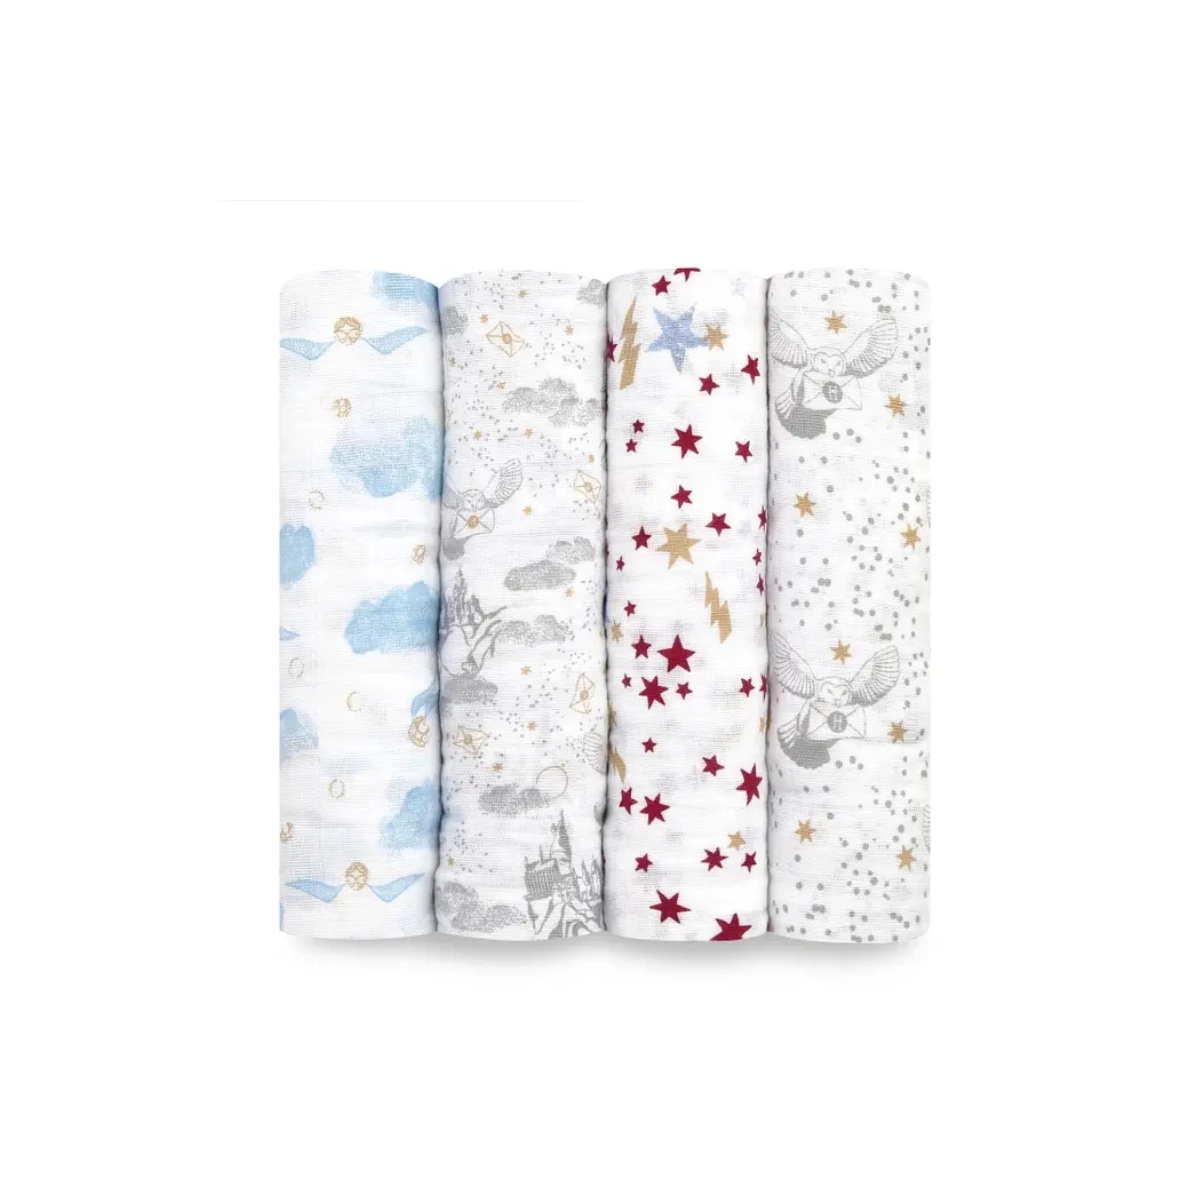 Aden + Anais Pack of 4 Large Swaddle Cotton Muslin Iconic Collection